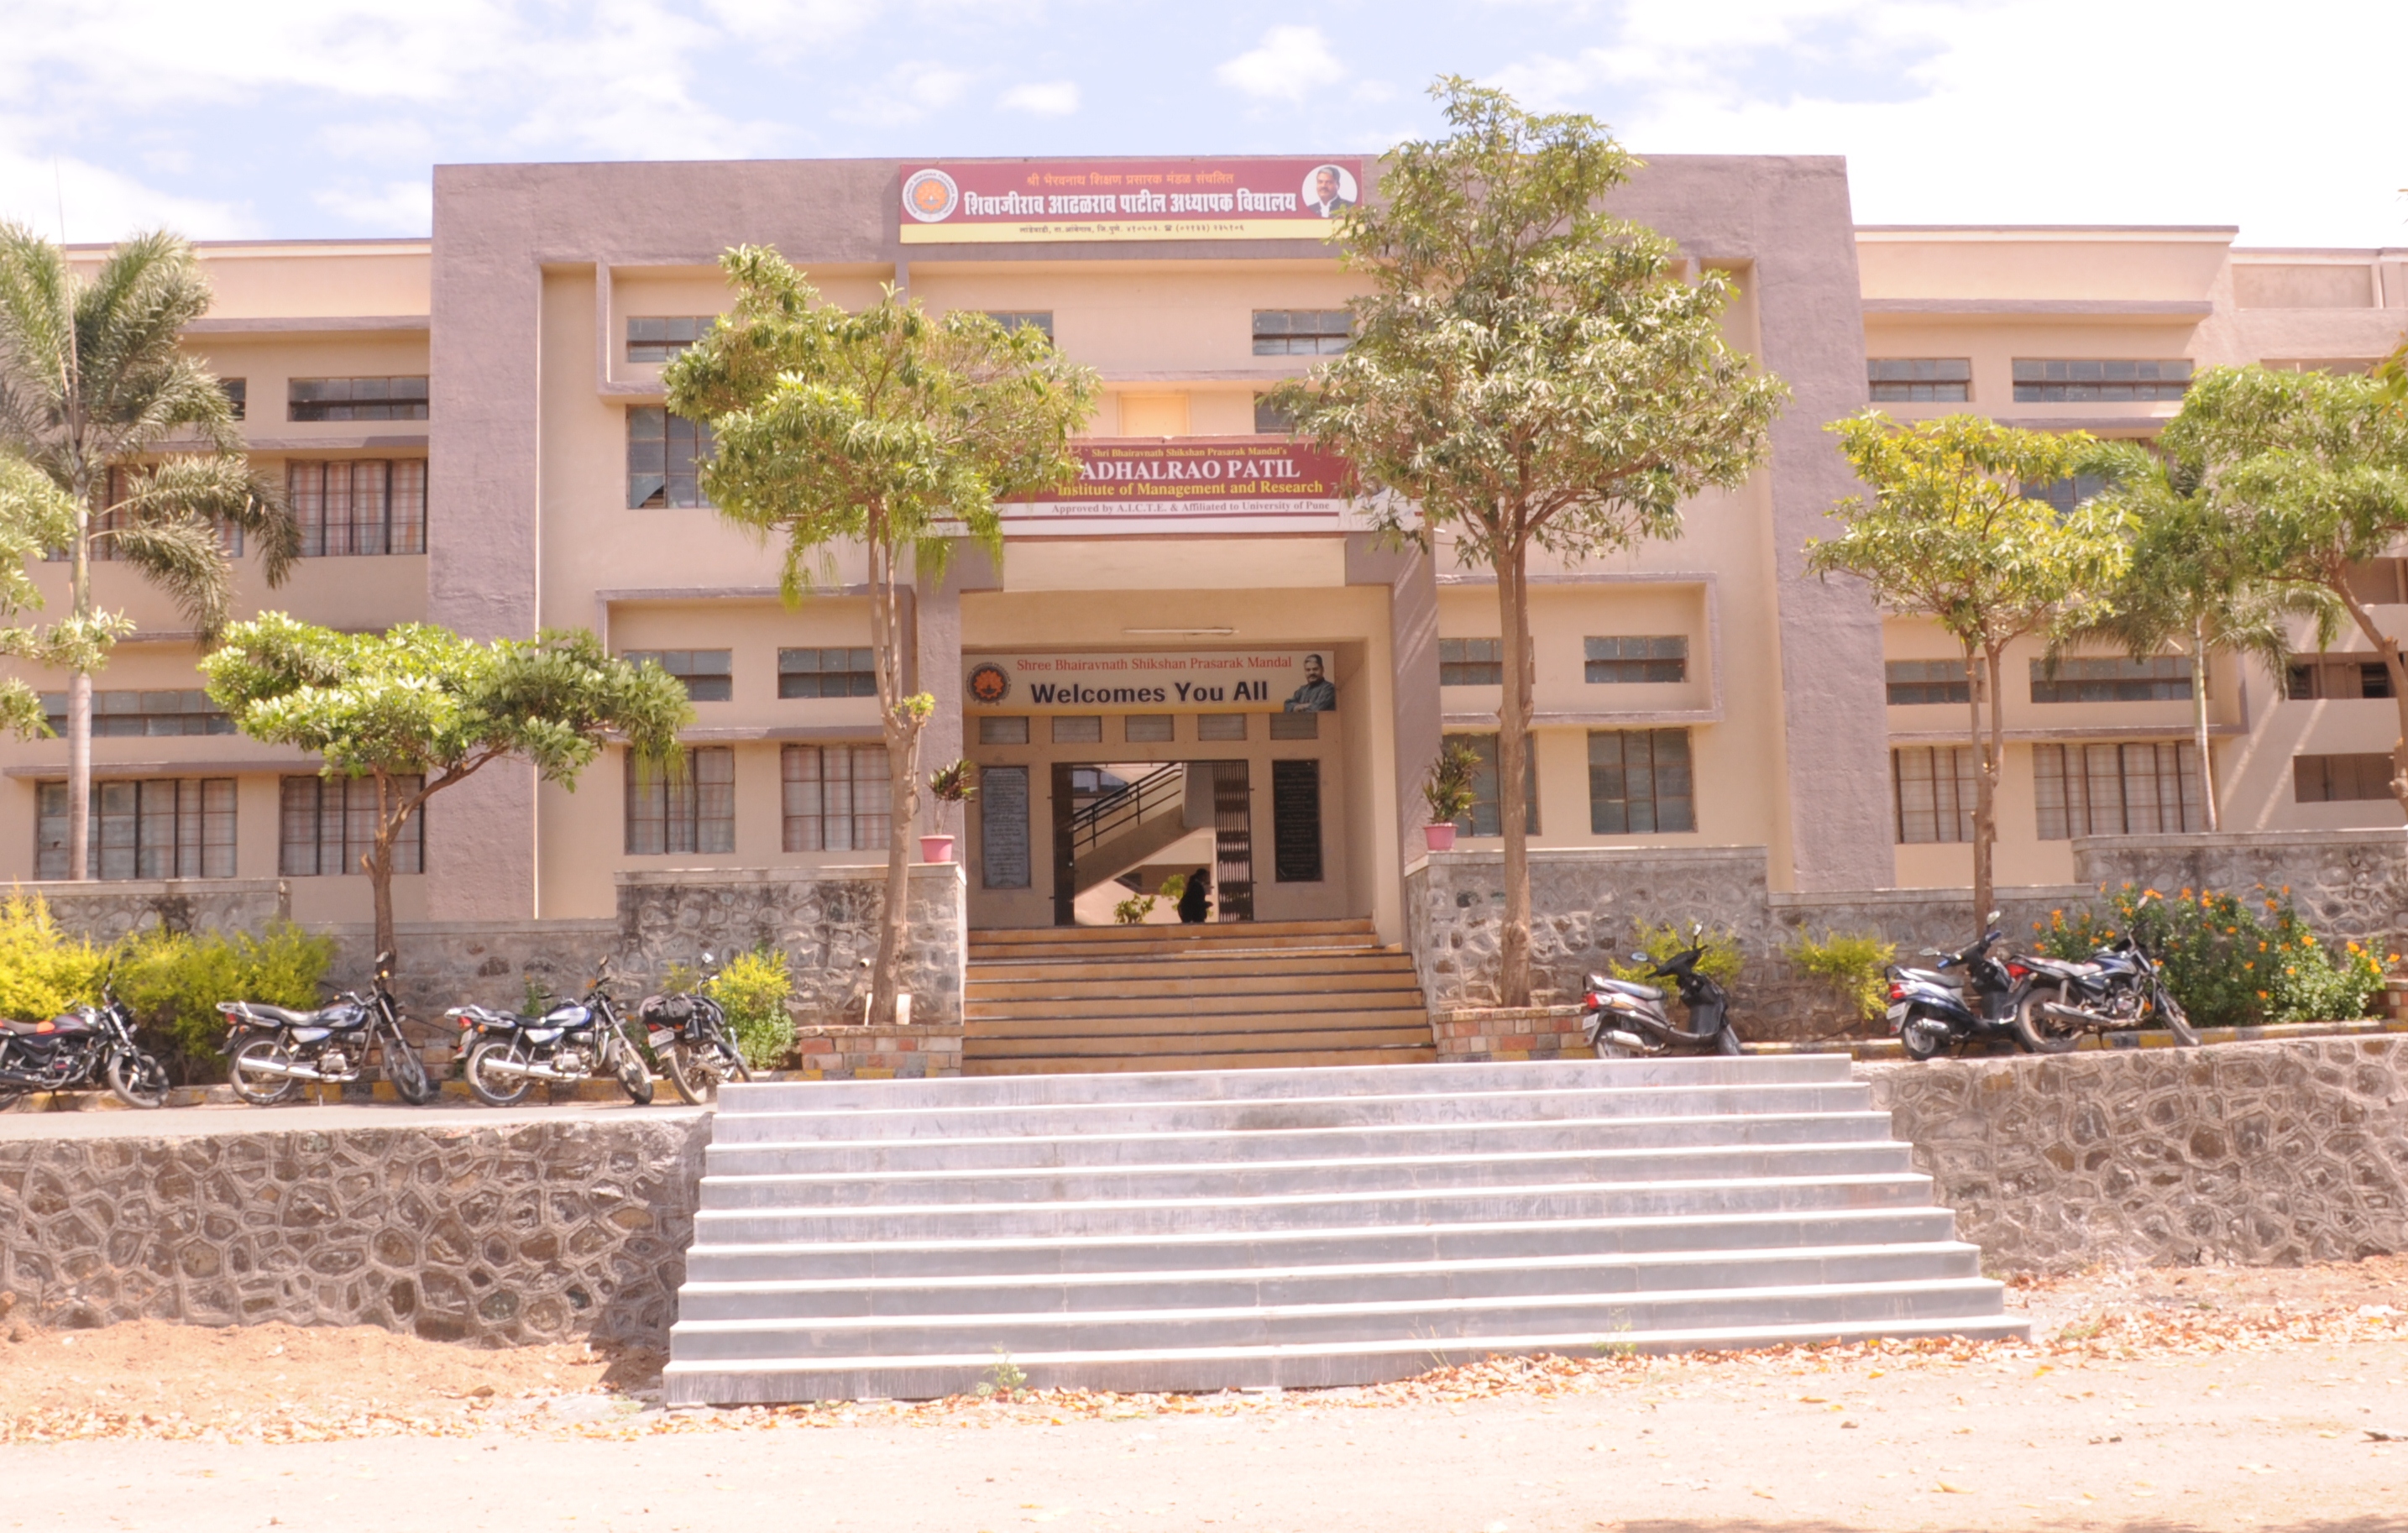 ADHALRAO PATIL INSTITUTE OF MANAGEMENT AND RESEARCH